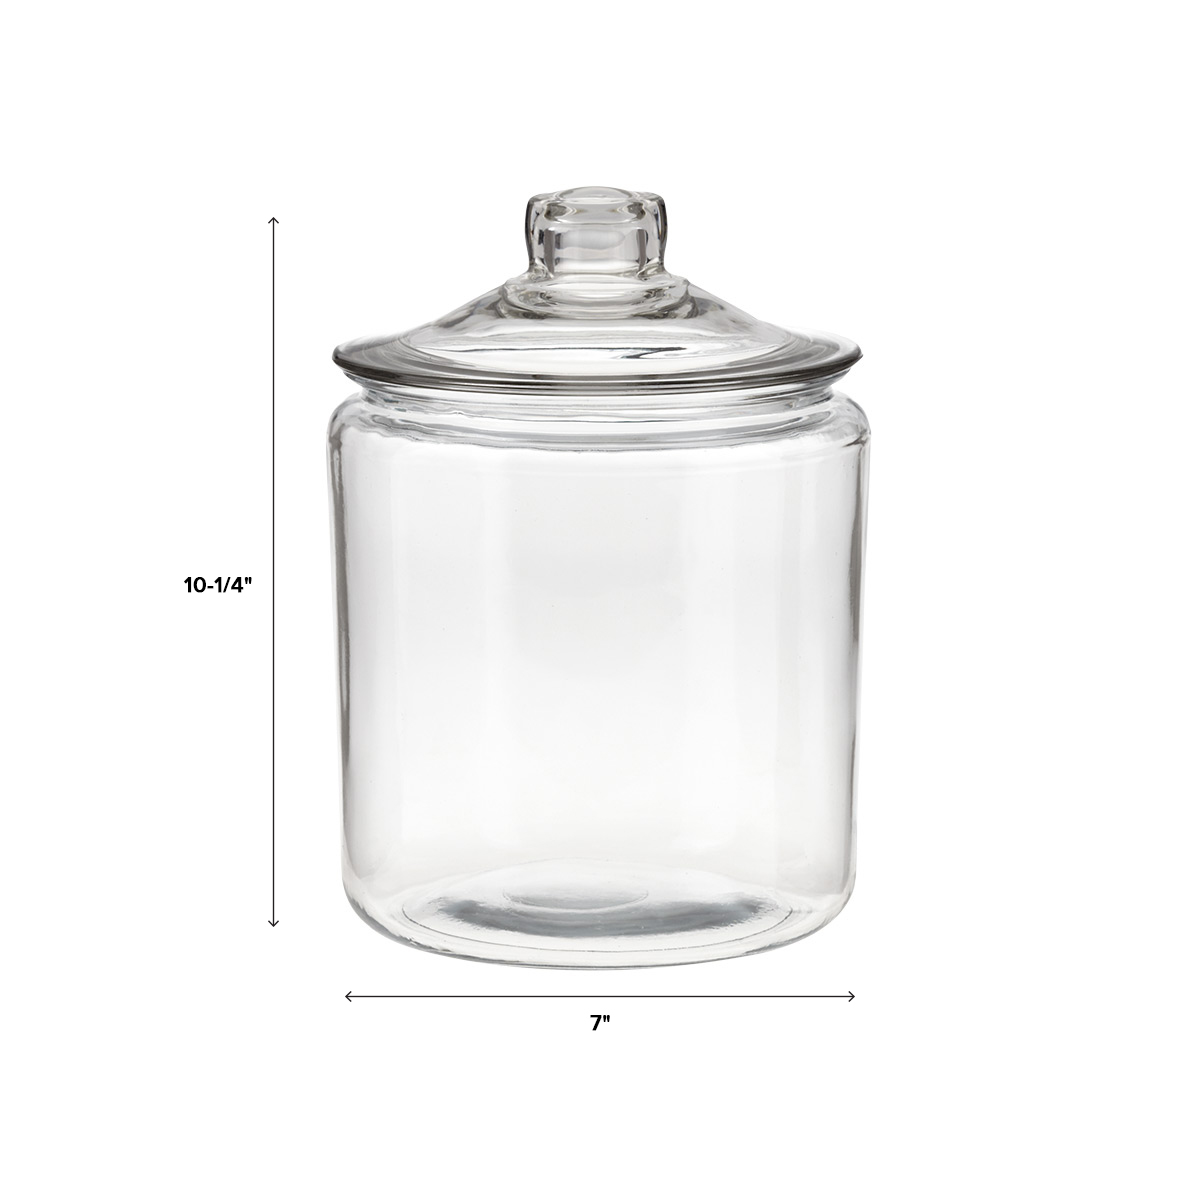 https://www.containerstore.com/catalogimages/447127/72210-GlassCanister1gal-DIM.jpg